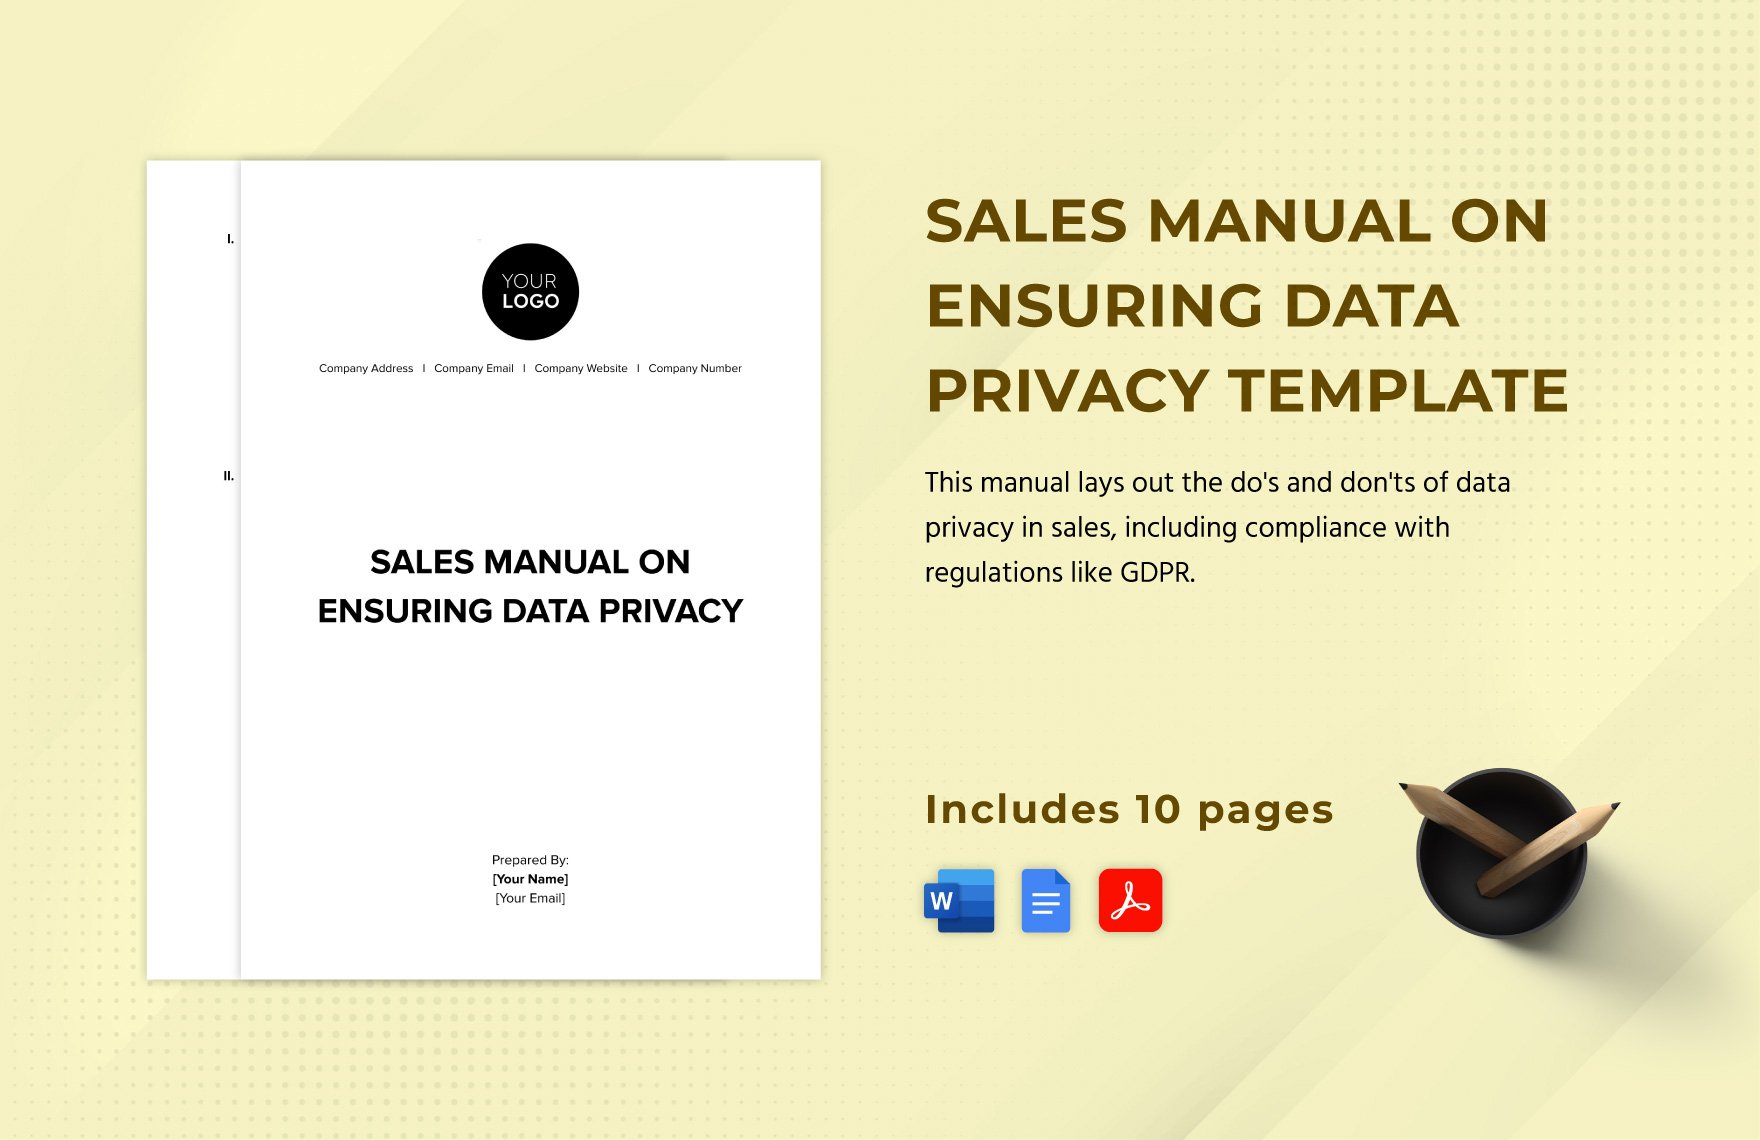 Sales Manual on Ensuring Data Privacy Template in Word, Google Docs, PDF